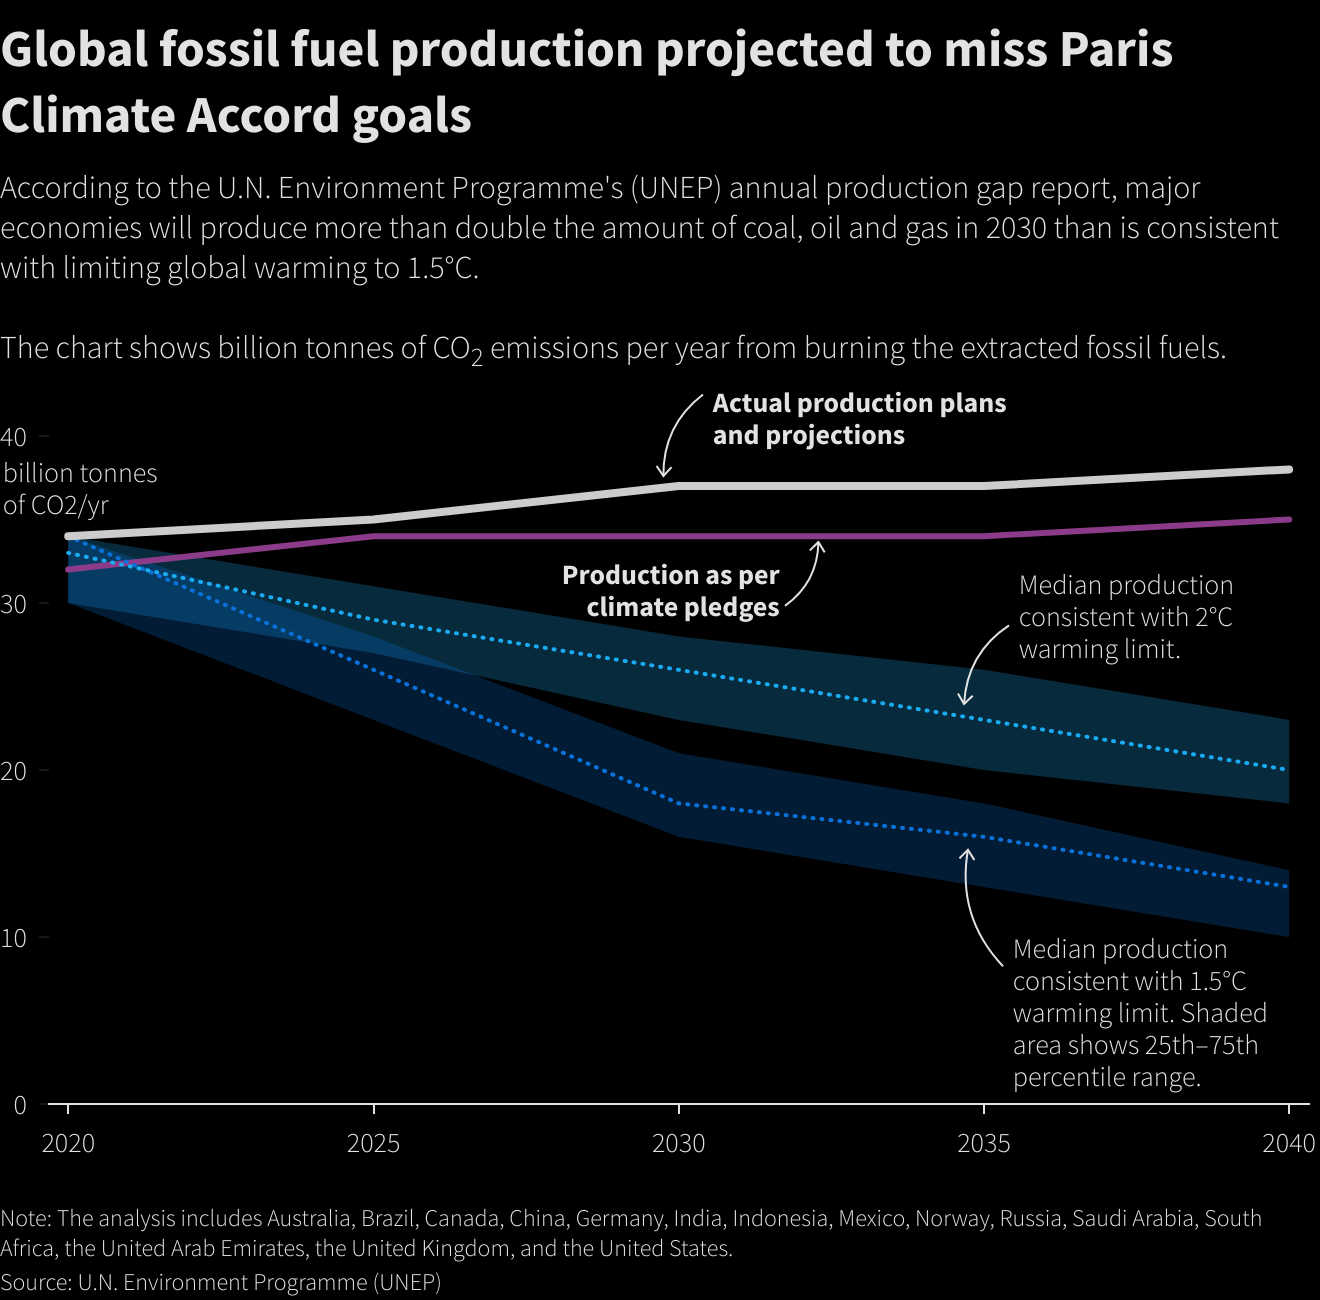 Global fossil fuel production projected to miss Paris Climate Accord goals